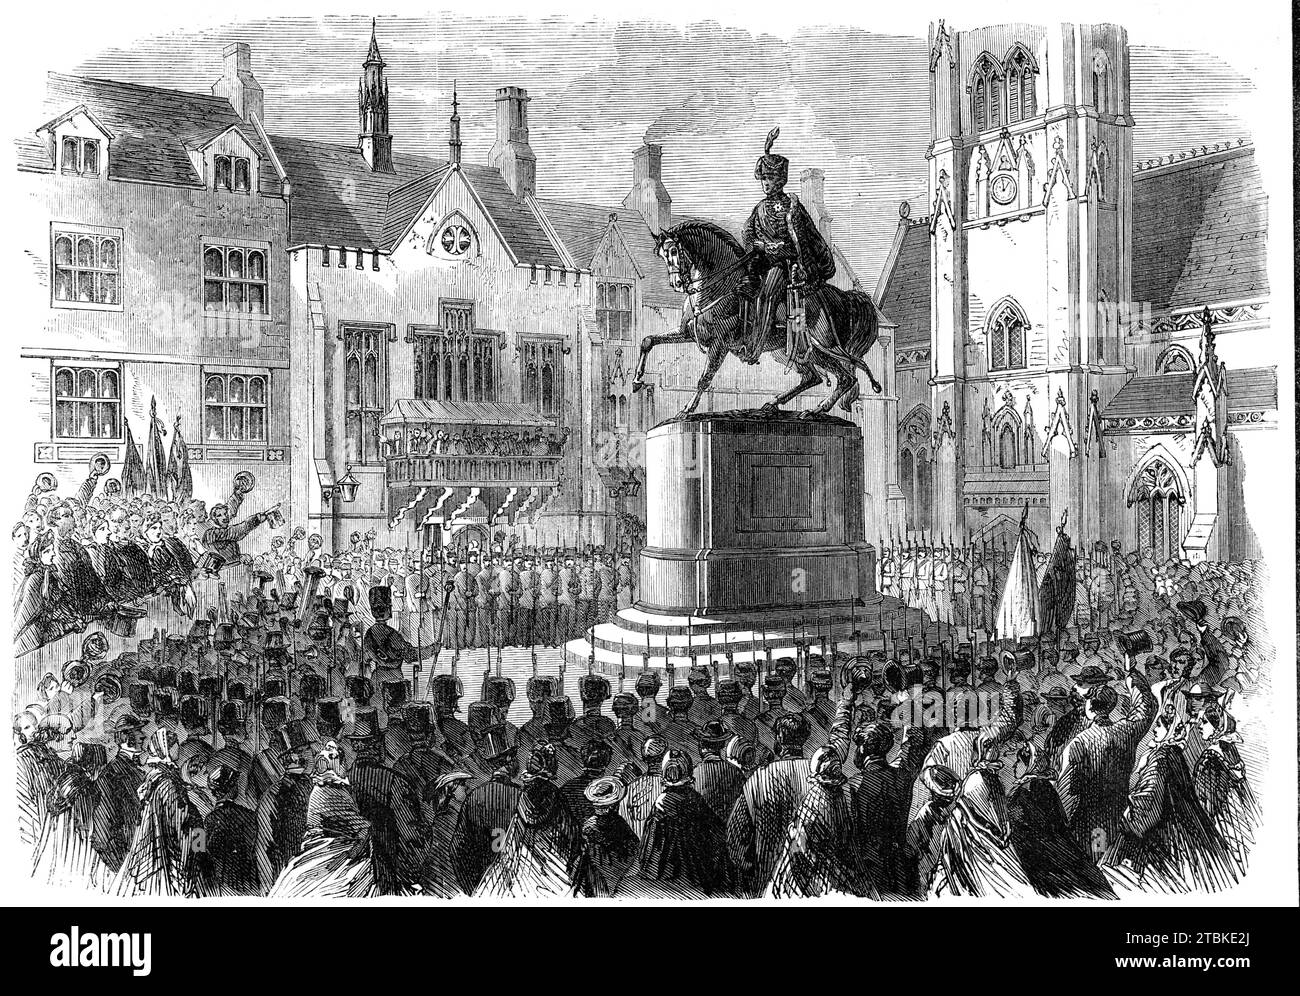 Inauguration of the statue to the memory of the late Marquis of Londonderry at Durham, 1861. 'The site of the monument is in the market-place, immediately adjoining St. Nicholas' Church and the Townhall. The work has been executed by the process of metal depositing called galvano-plastic, or electrotyping, and it is the only equestrian statue and the largest production attempted as yet by this process by a private sculptor...The attendance of several of the volunteer corps of the district was a fitting mark of respect to the memory of the deceased Marquis...The Marchioness of Londonderry and p Stock Photo